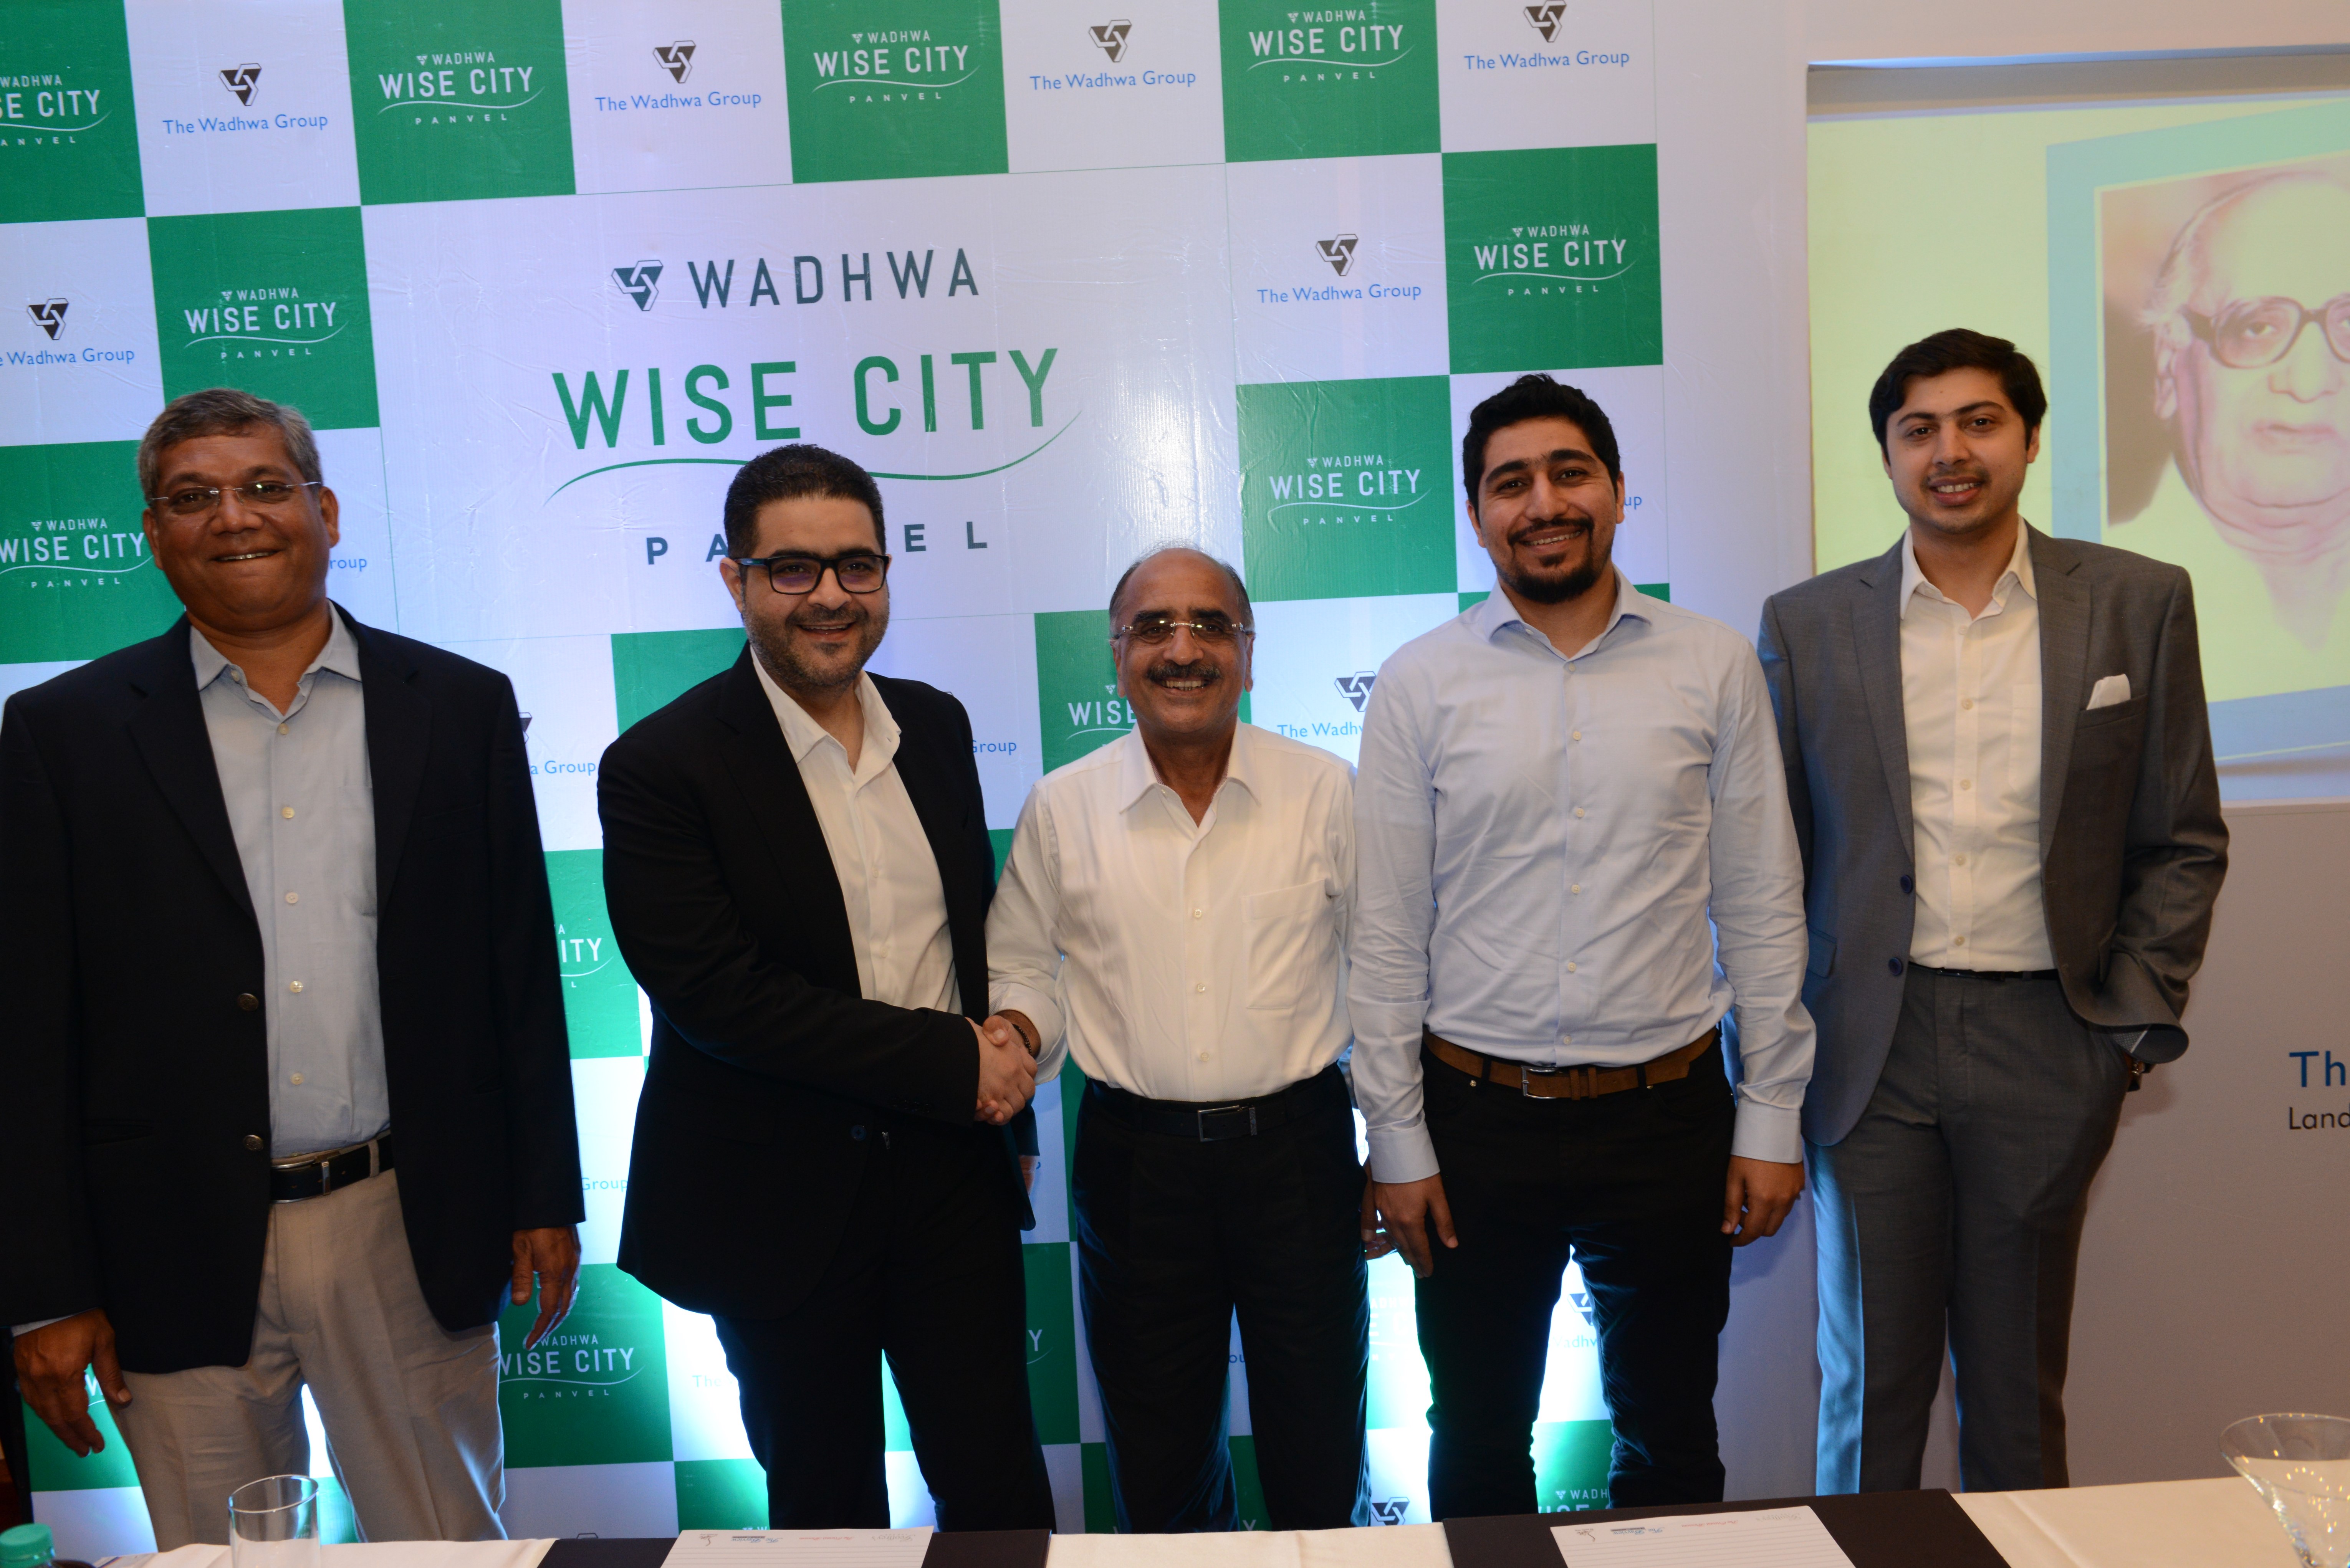 Wadhwa Group plans investments of Rs. 2200 crore in Wadhwa Wise City